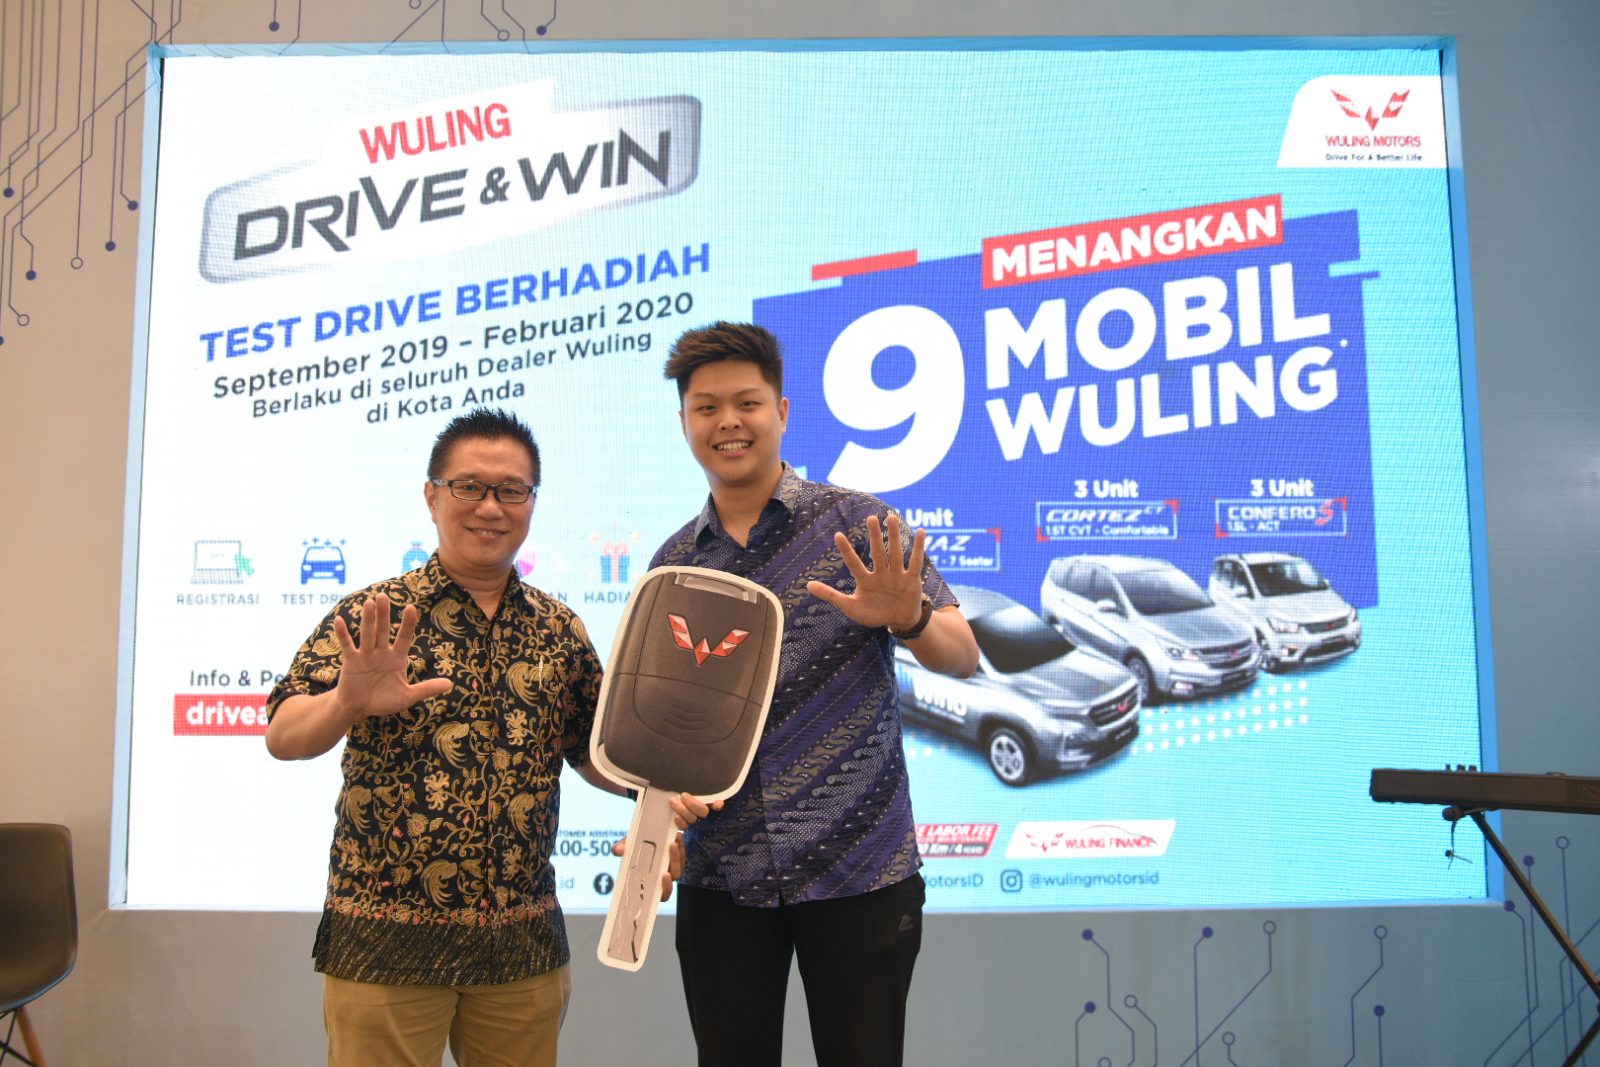 Image The Second Period of Wuling ‘Drive & Win’ Program Prize is Given to the Winners